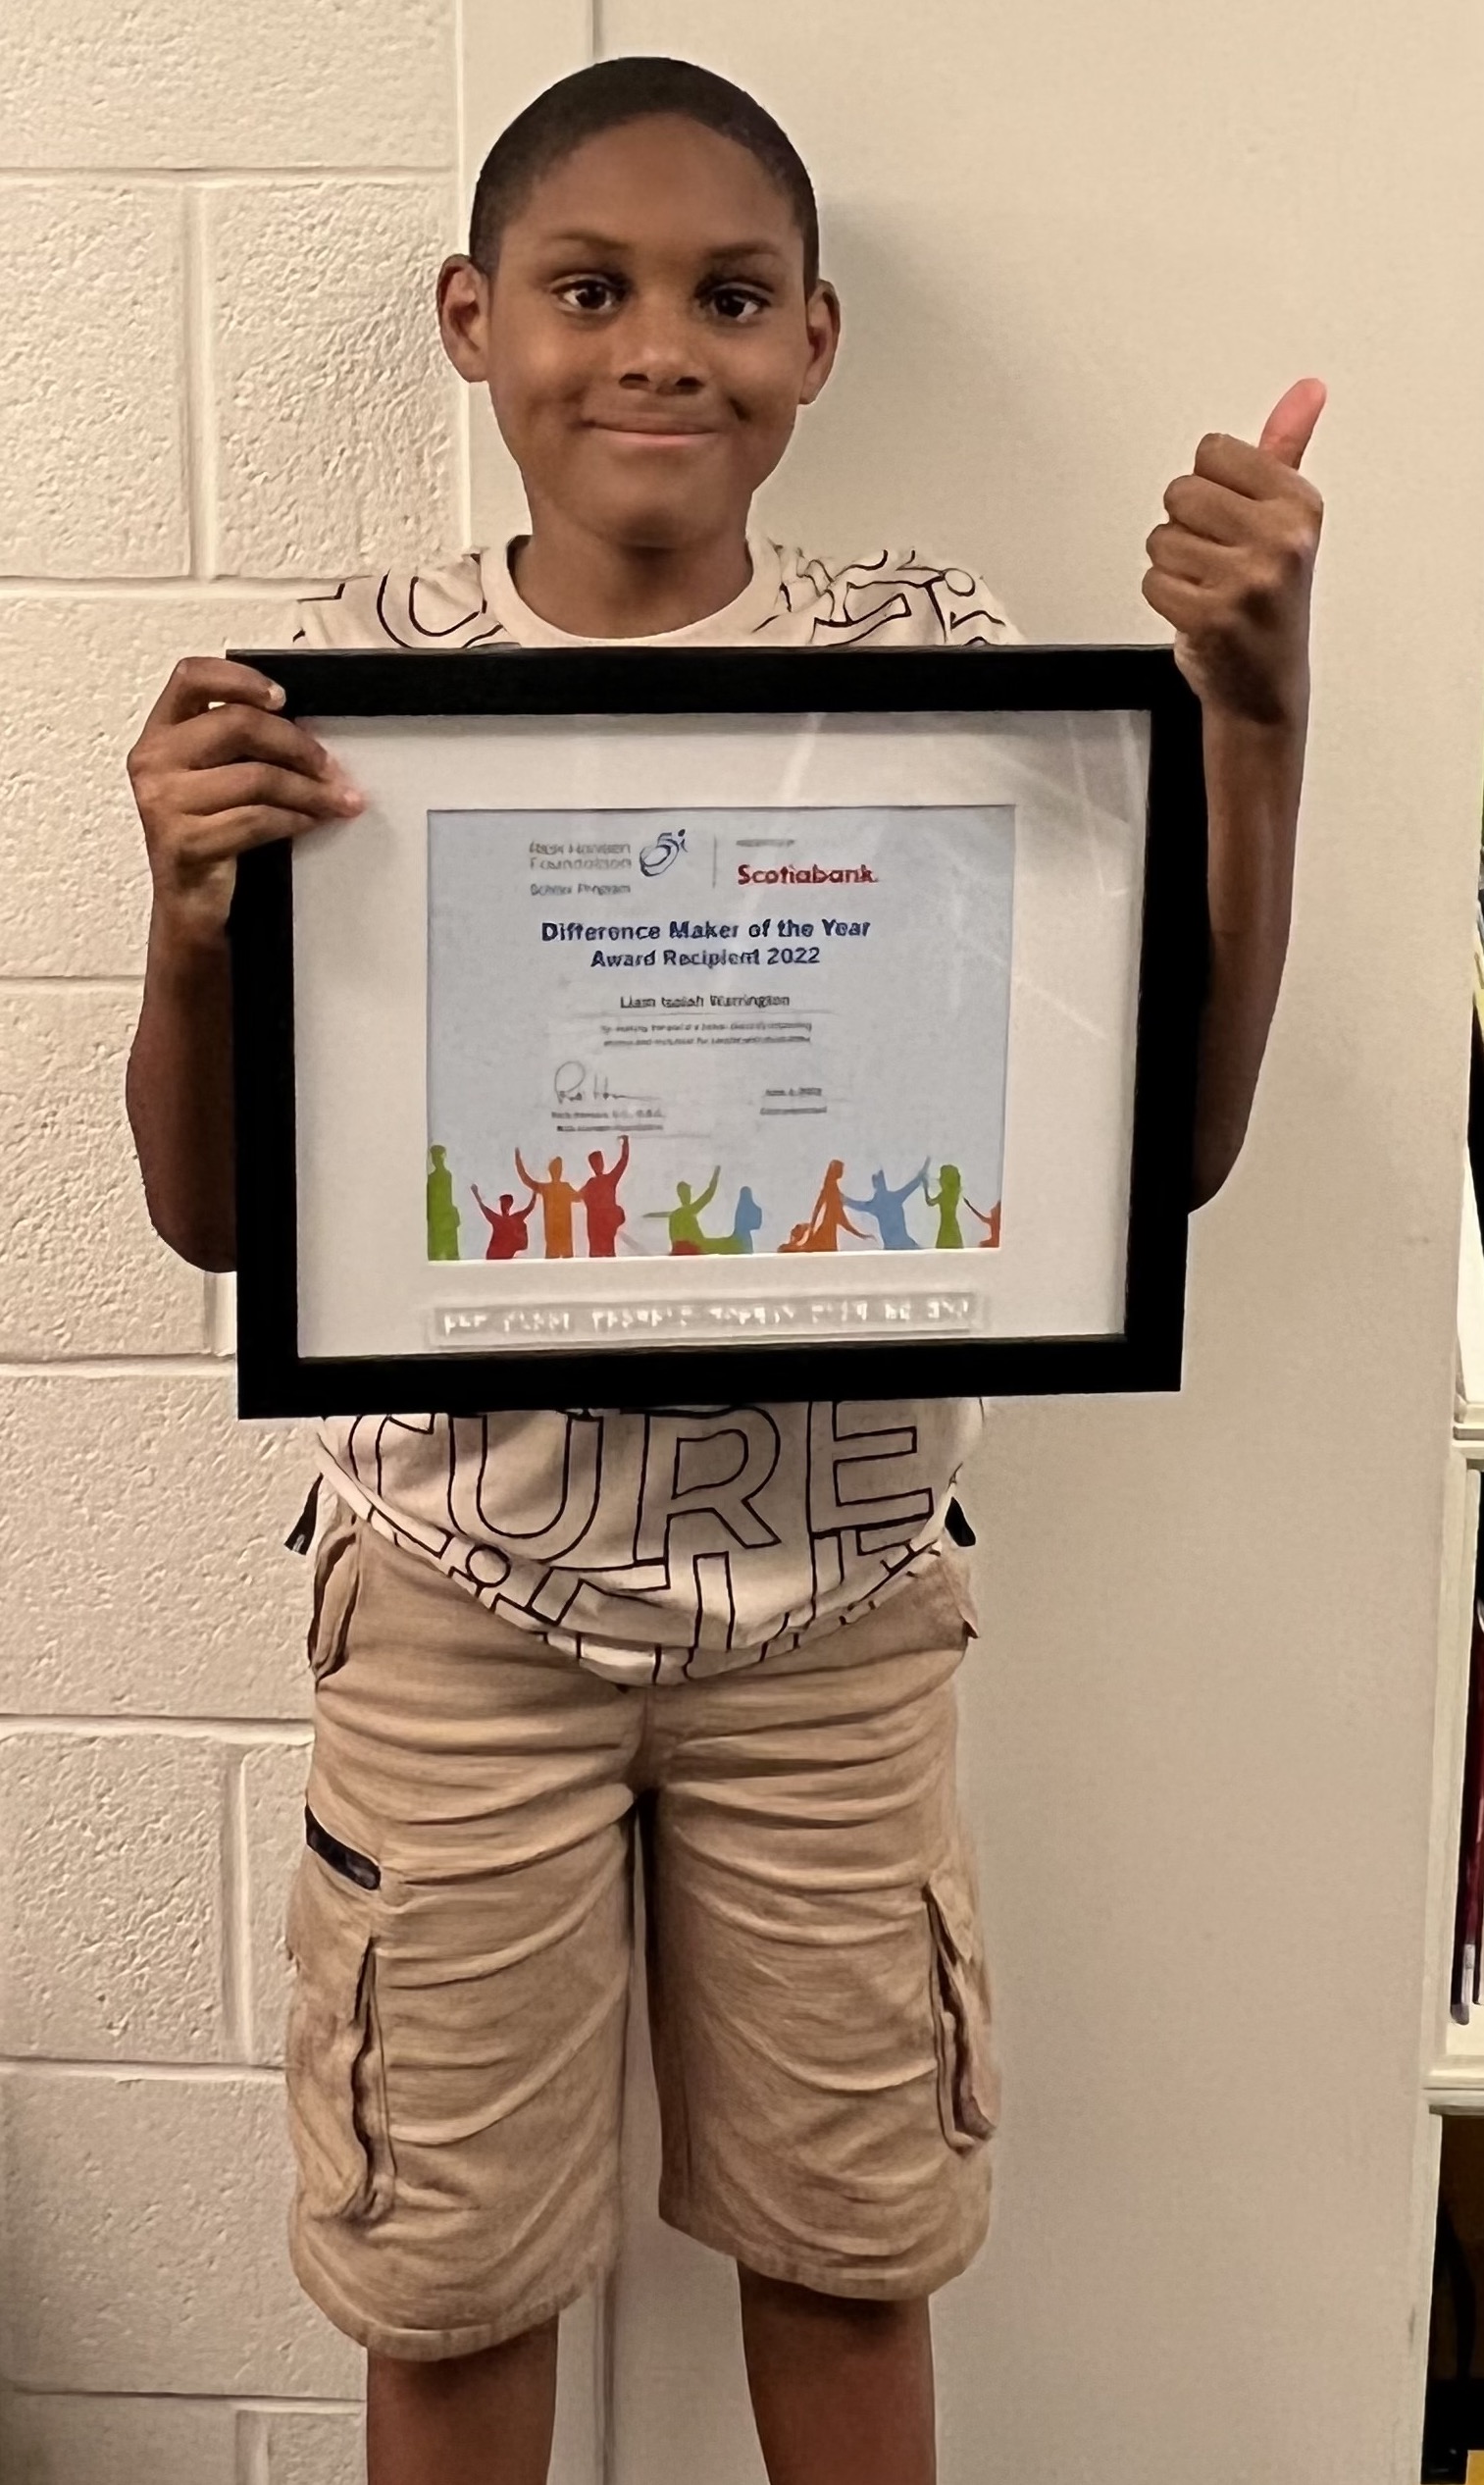 Young boy holding up a framed Difference Maker award certificate. He is wearing beige shorts and a white T-shirt.